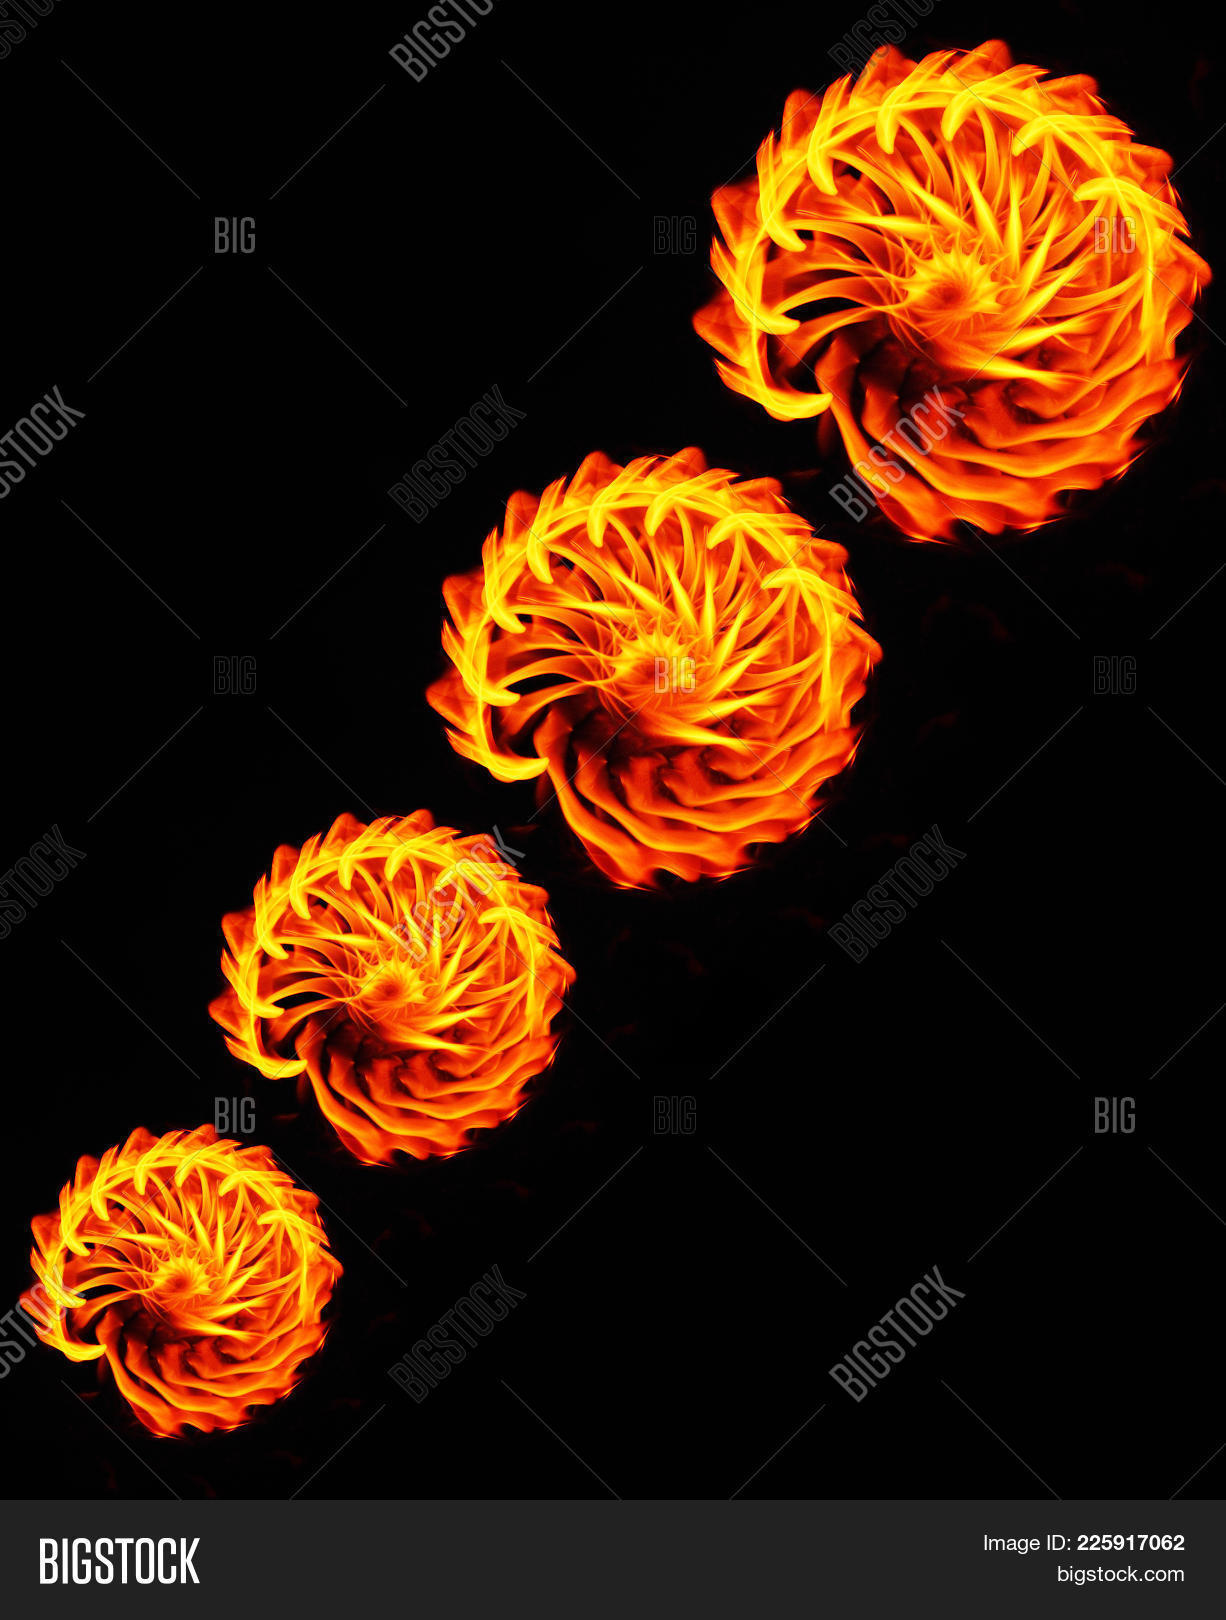 Abstract Fire Flames. Fire Flower. Image & Photo | Bigstock